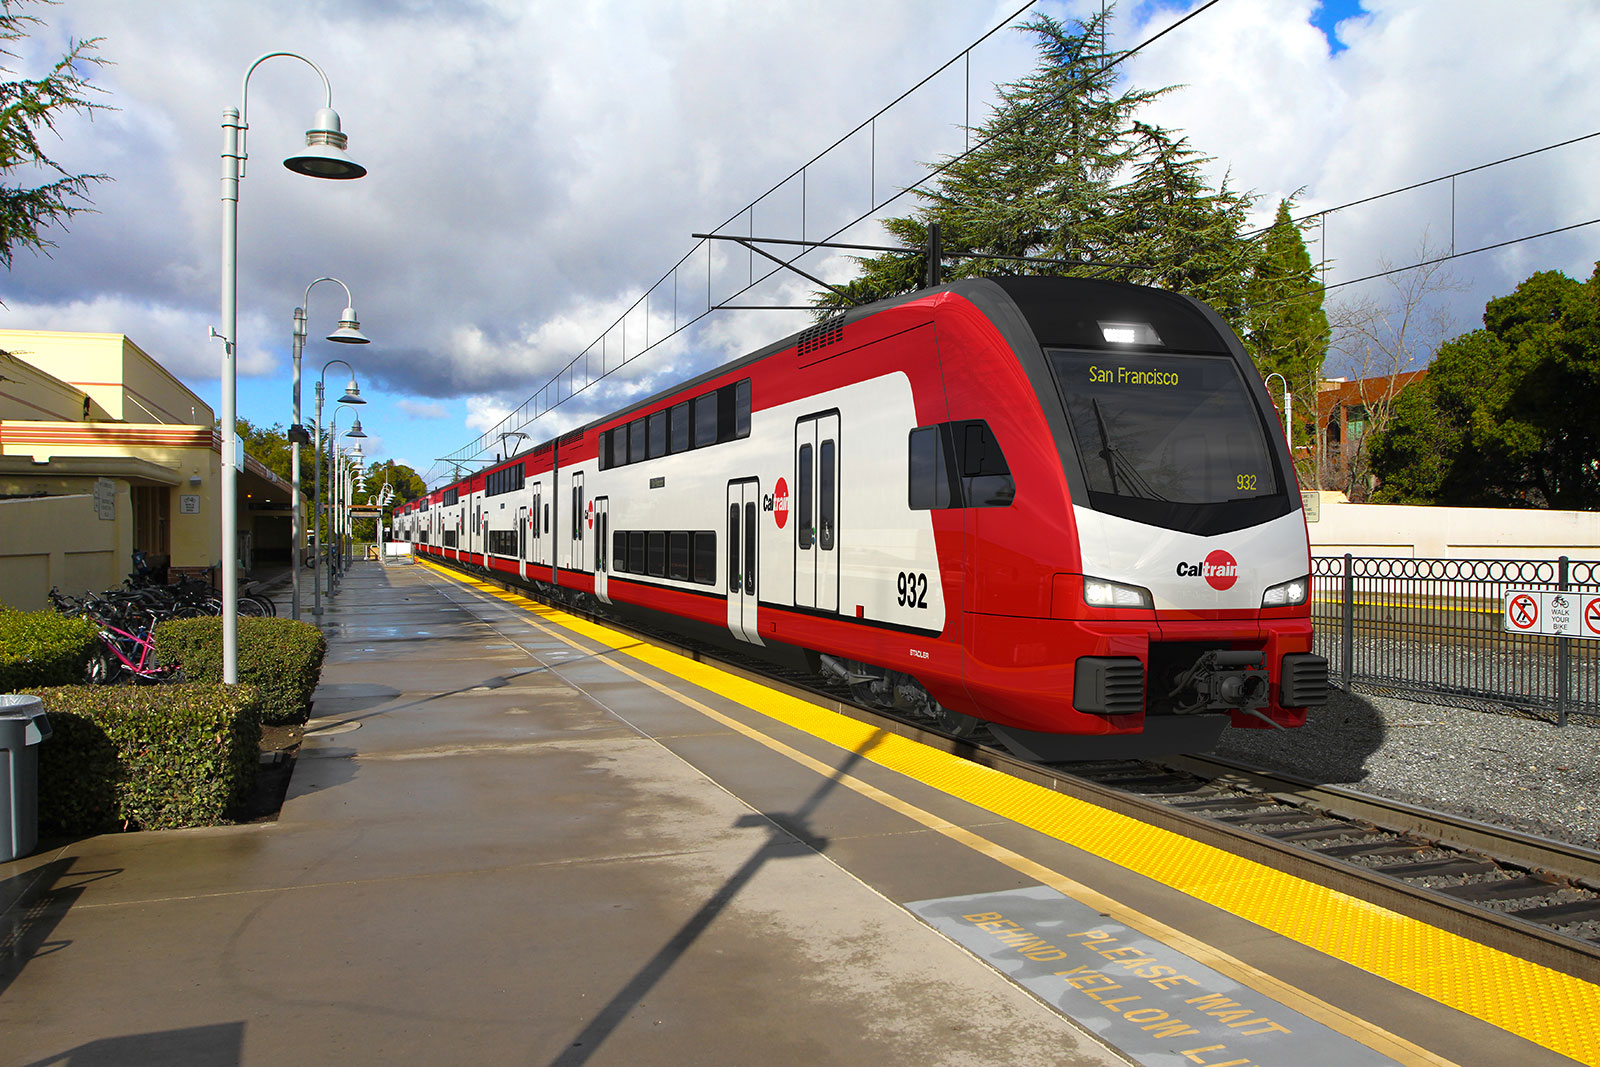 Artist impression of the KISS USA for Caltrain. Note the spacious top floor. Copyright Stadler Rail